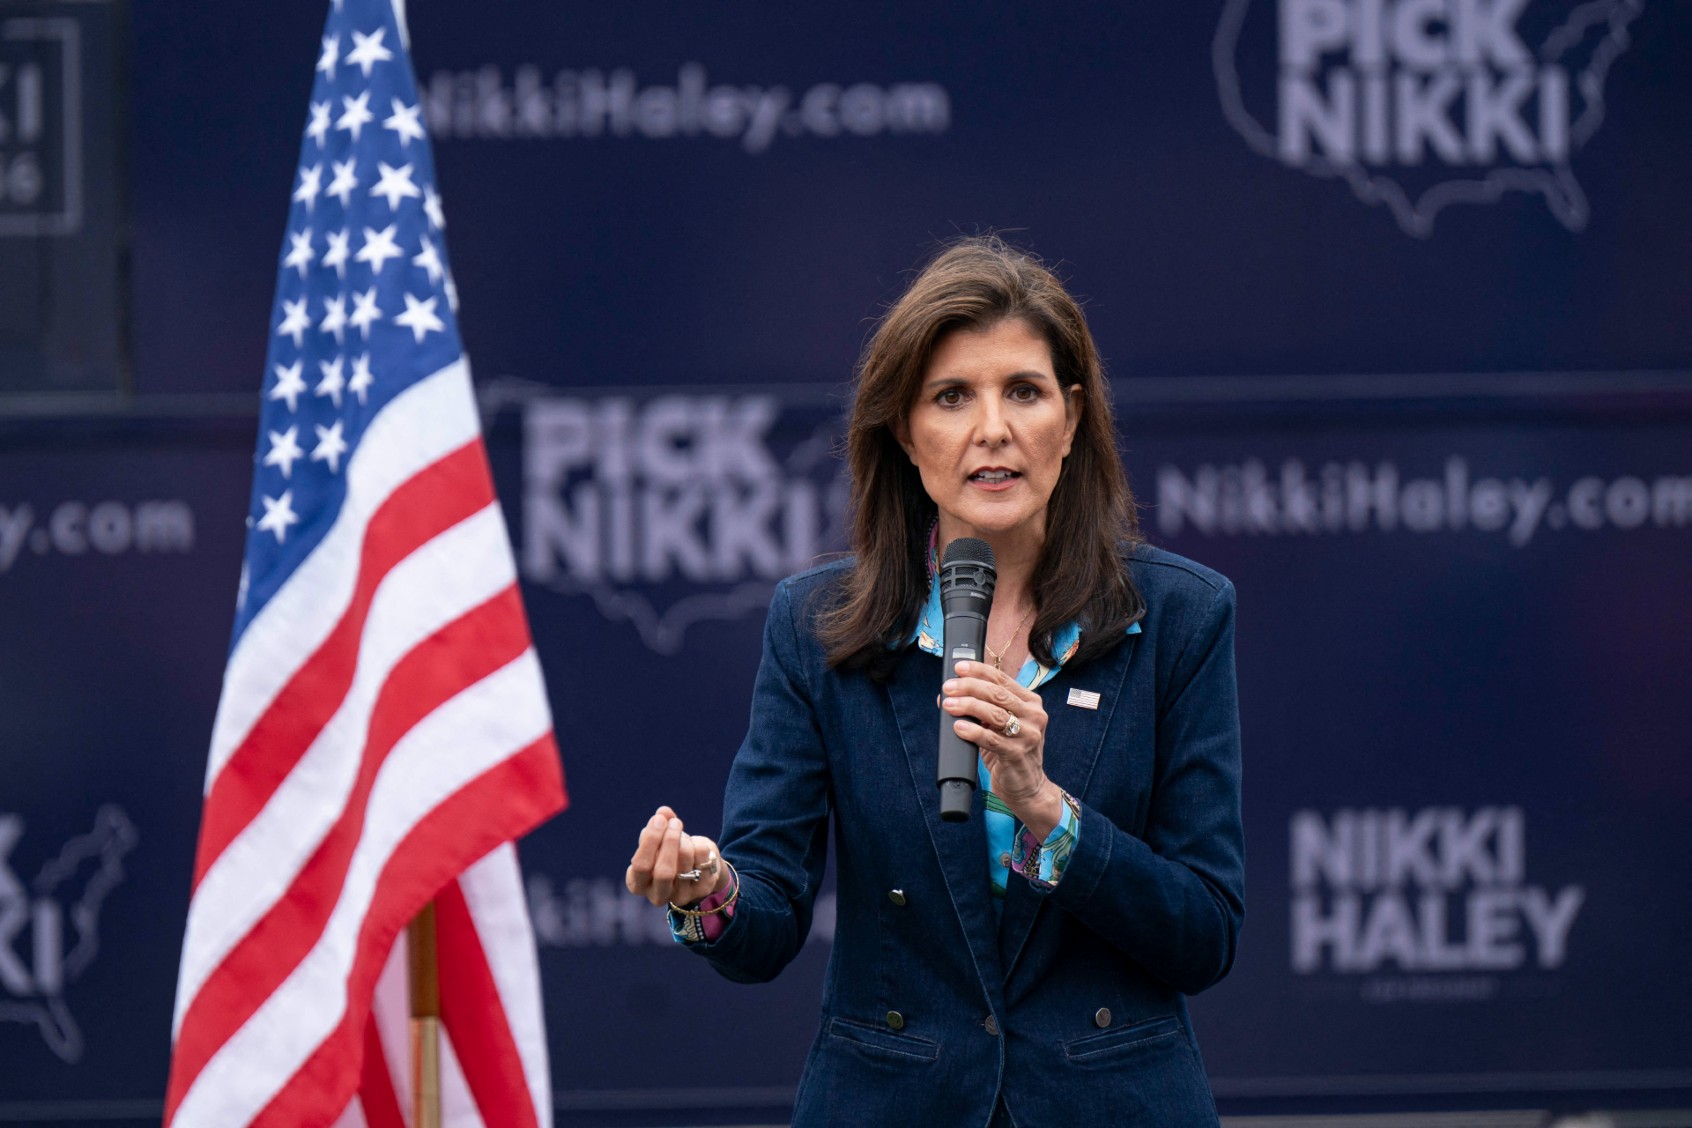 Nikki Haley is worried that Trump will use RNC as a piggy bank for his court fees